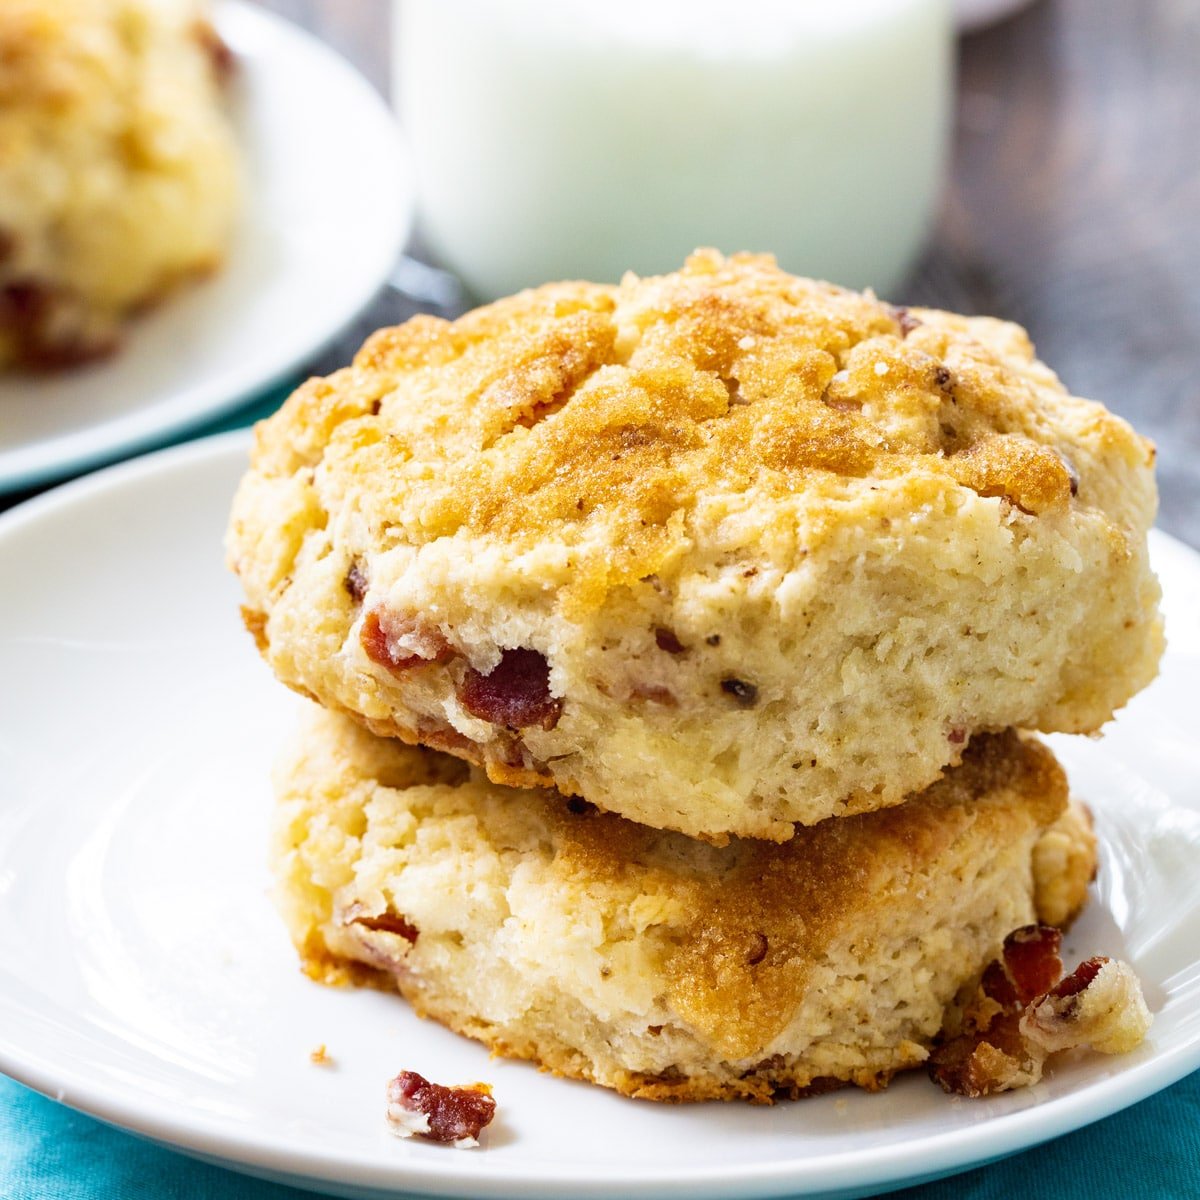 Two Brown Sugar and Bacon Biscuits on a plate.